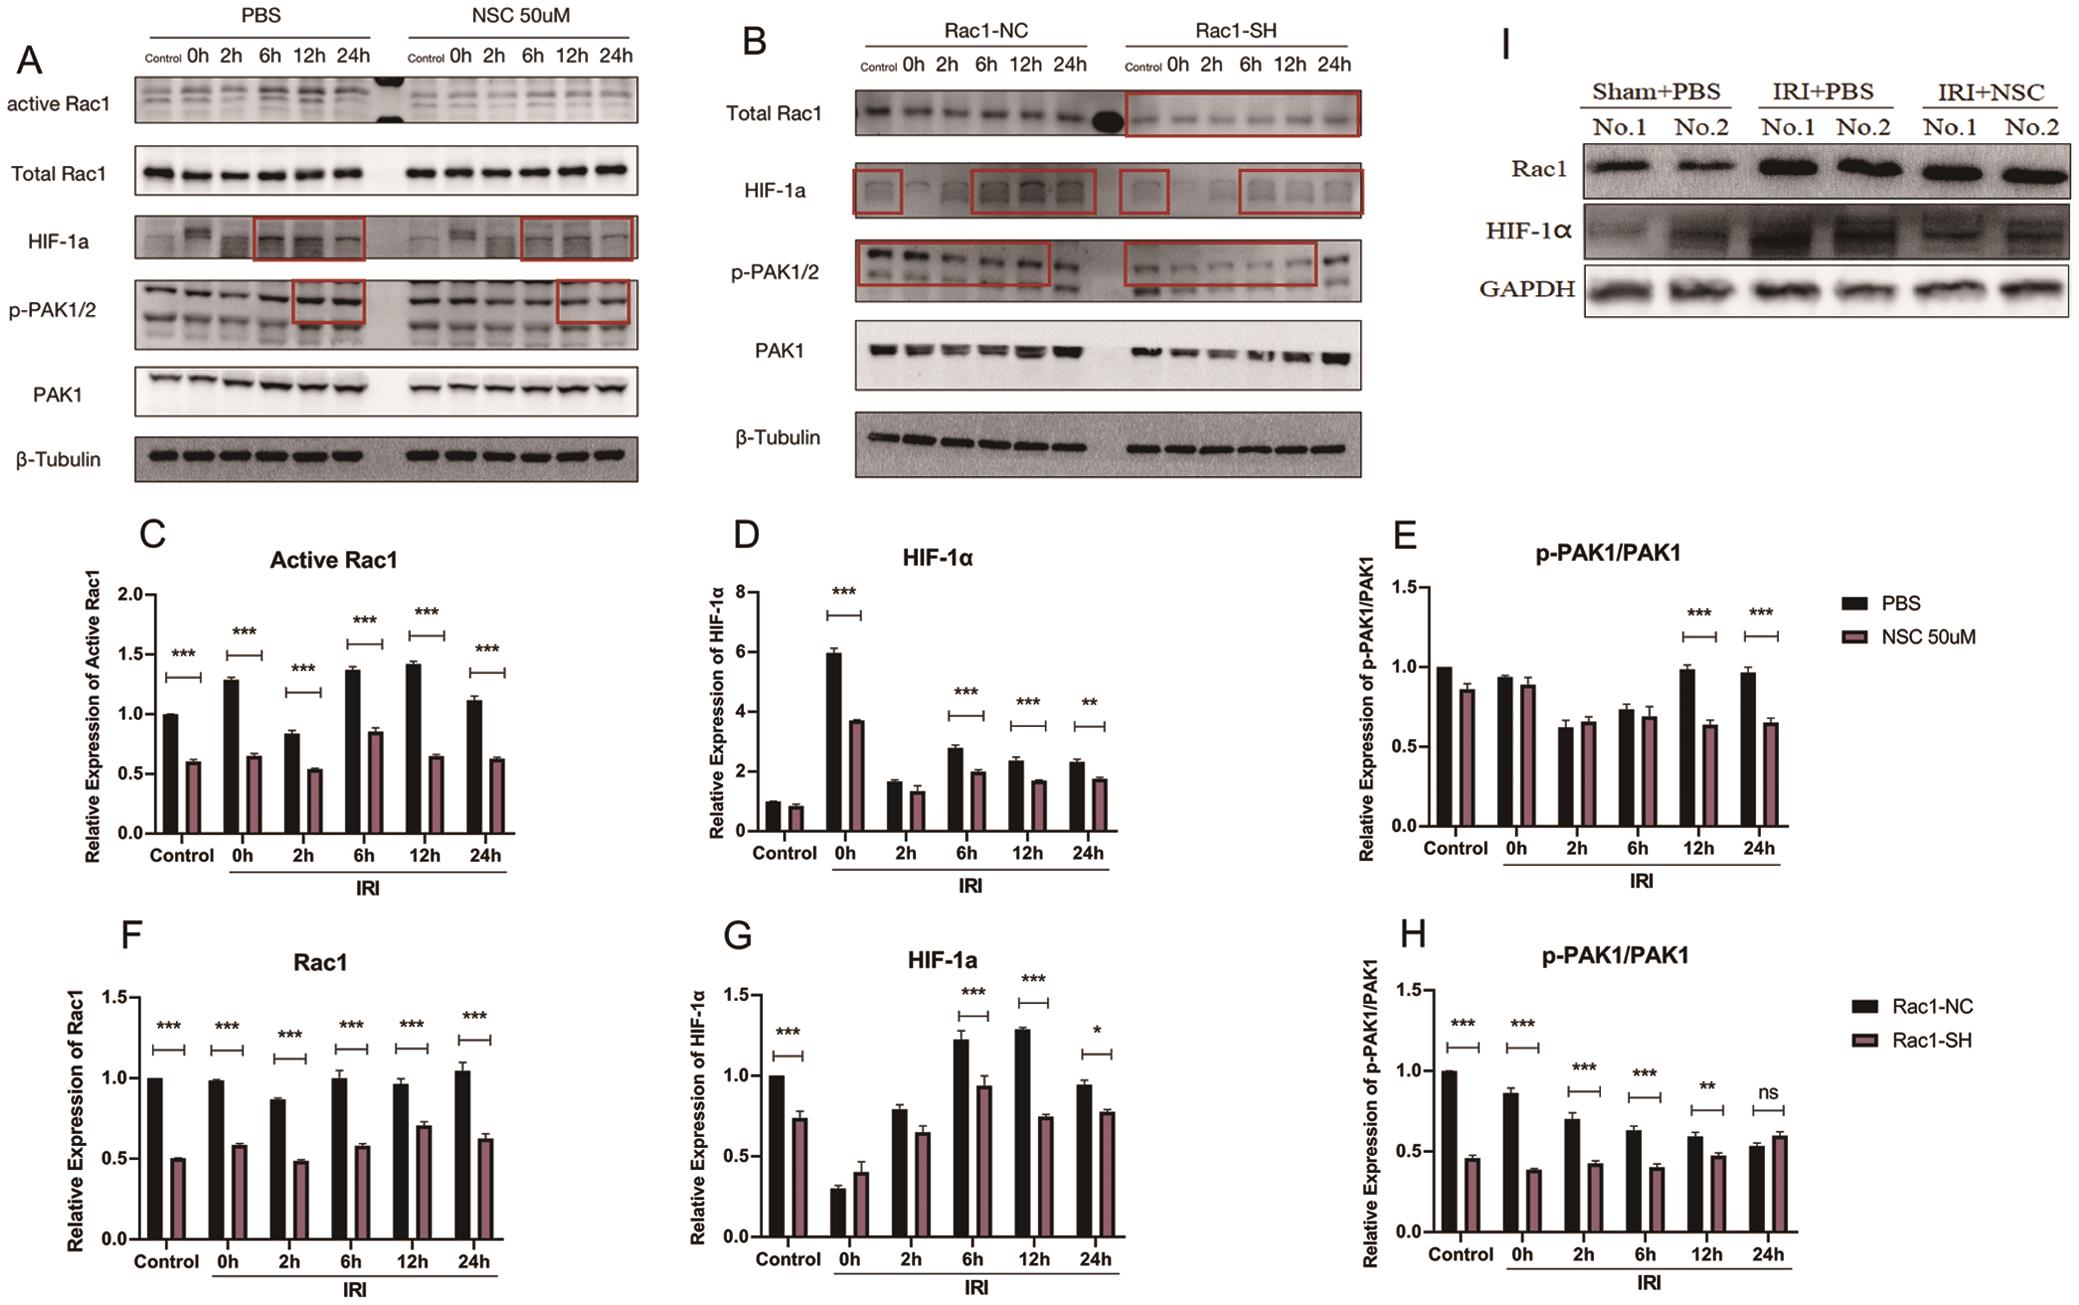 Inhibition of Rac1 reduced the prolonged up-regulation of HIF-1α induced by reperfusion.